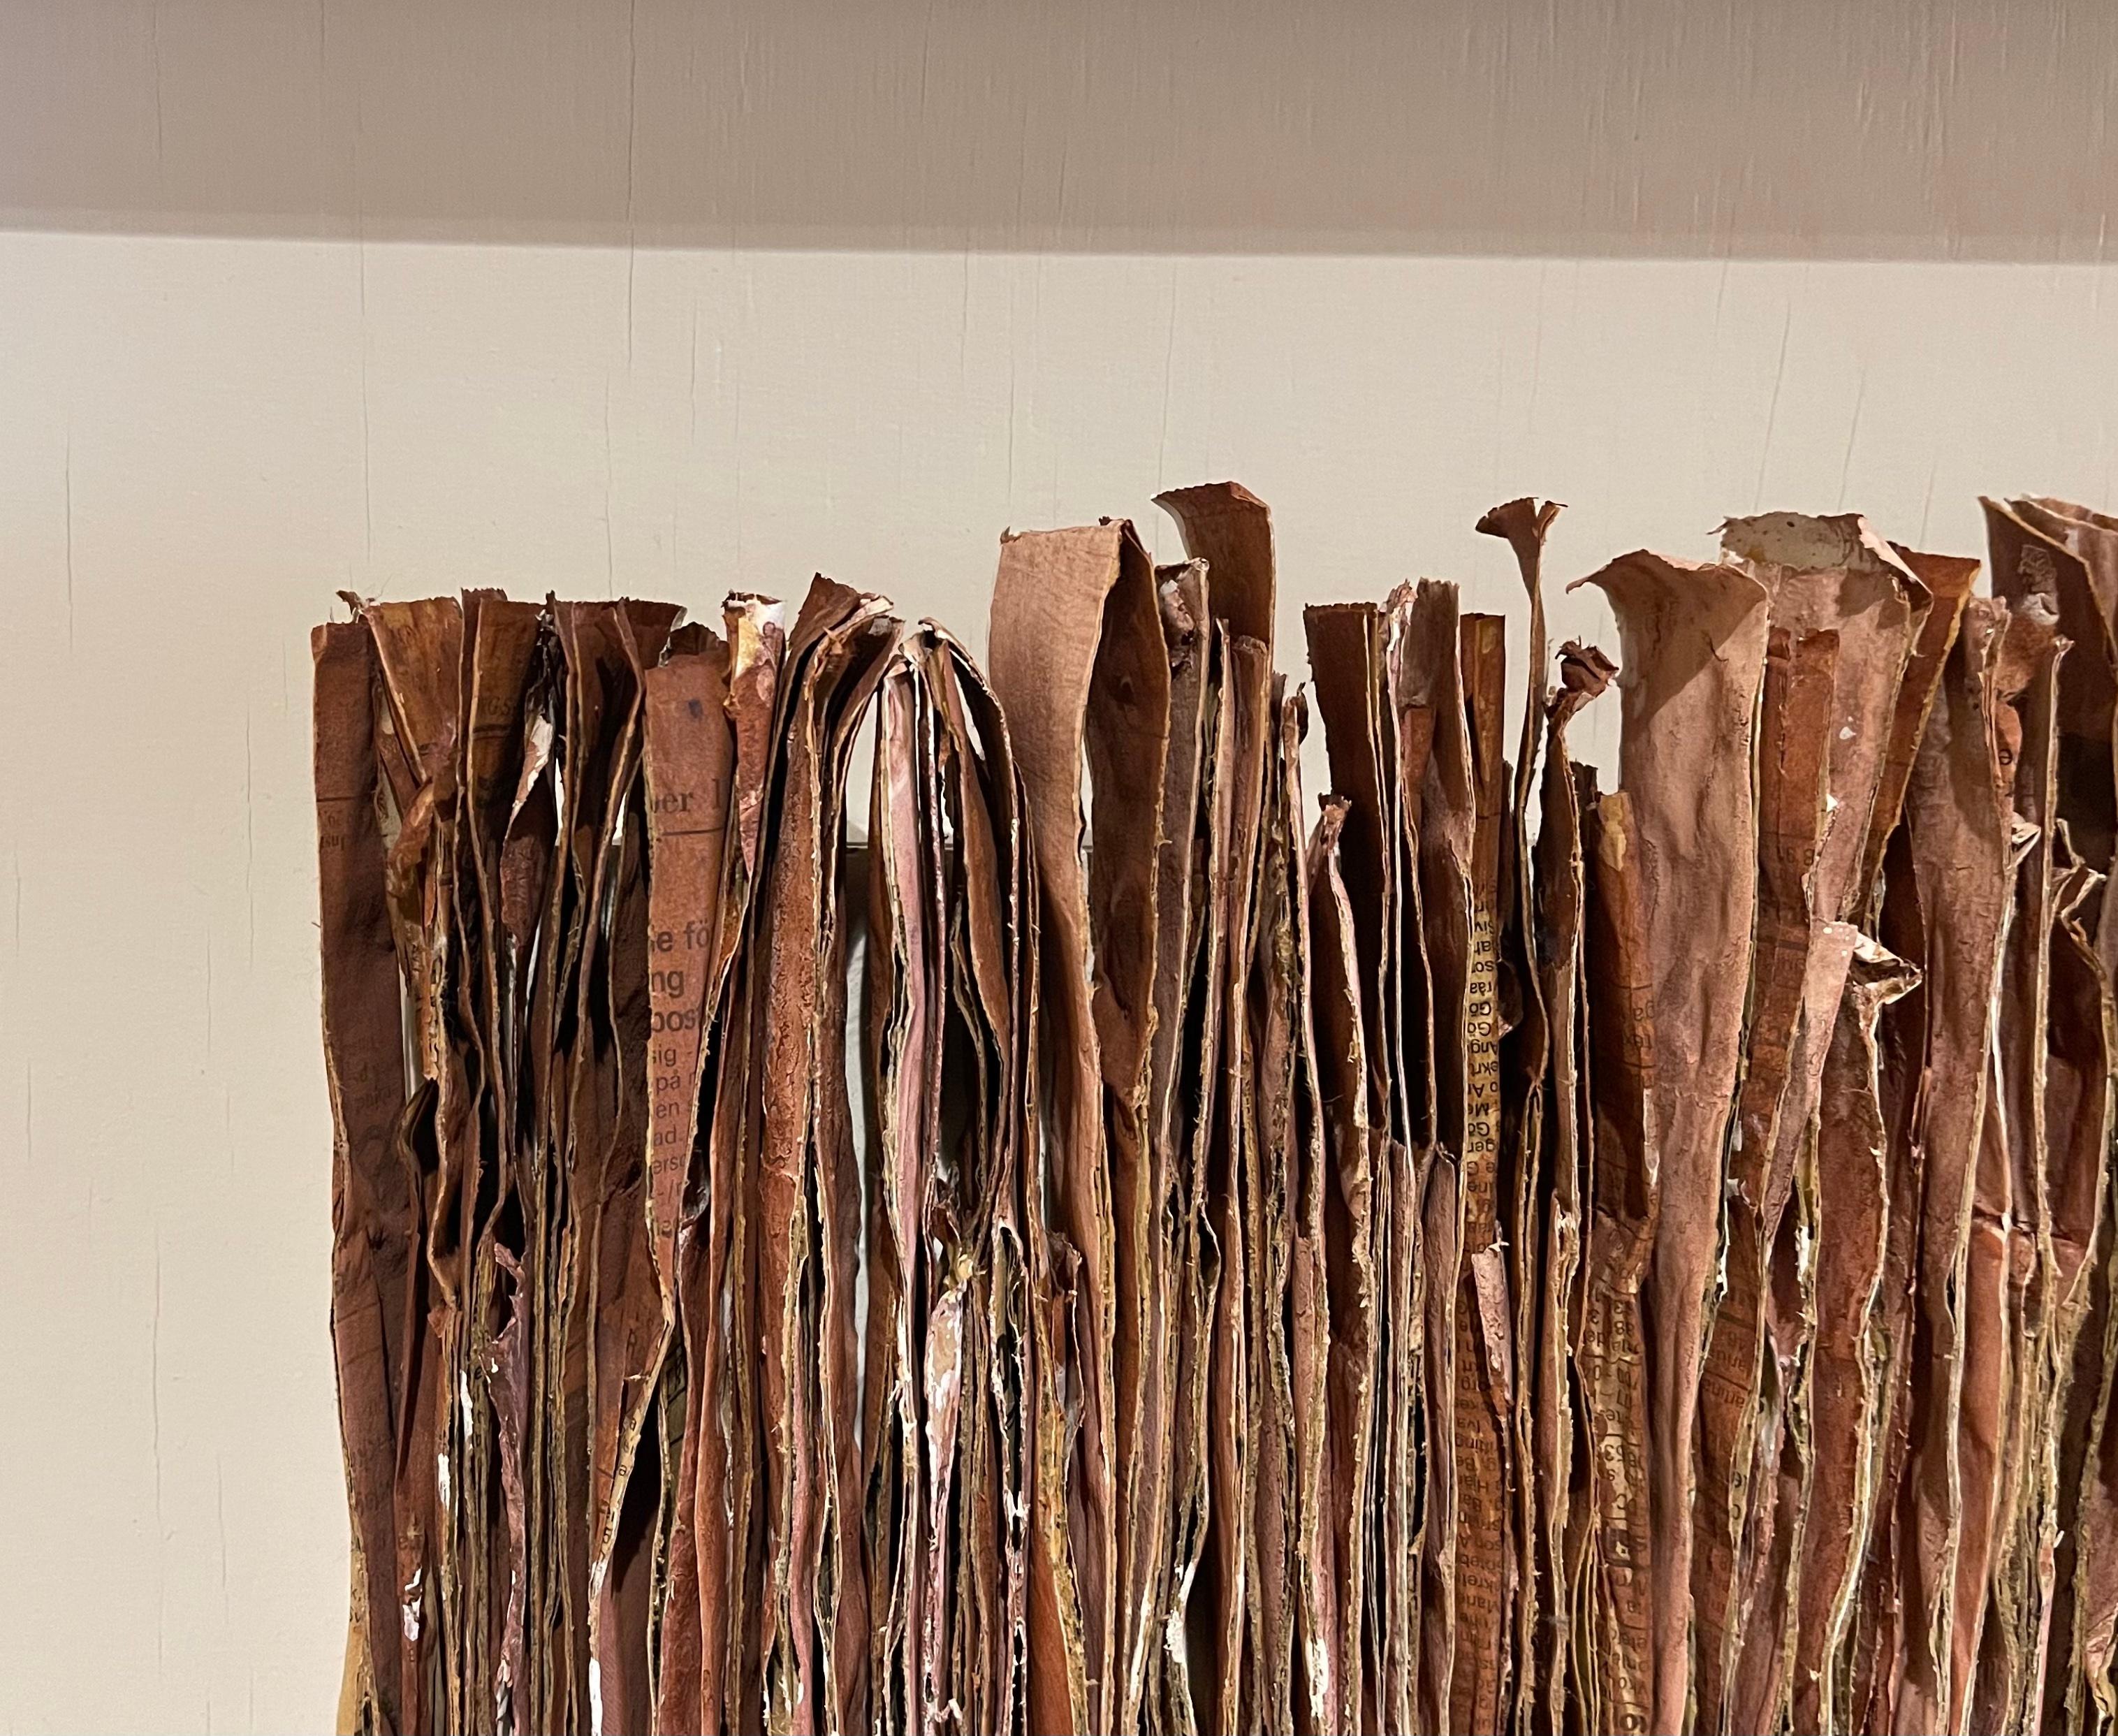 Large Contemporary Paper Assemblage In Warm Maroon Brown Color By Bo SällStröm For Sale 1